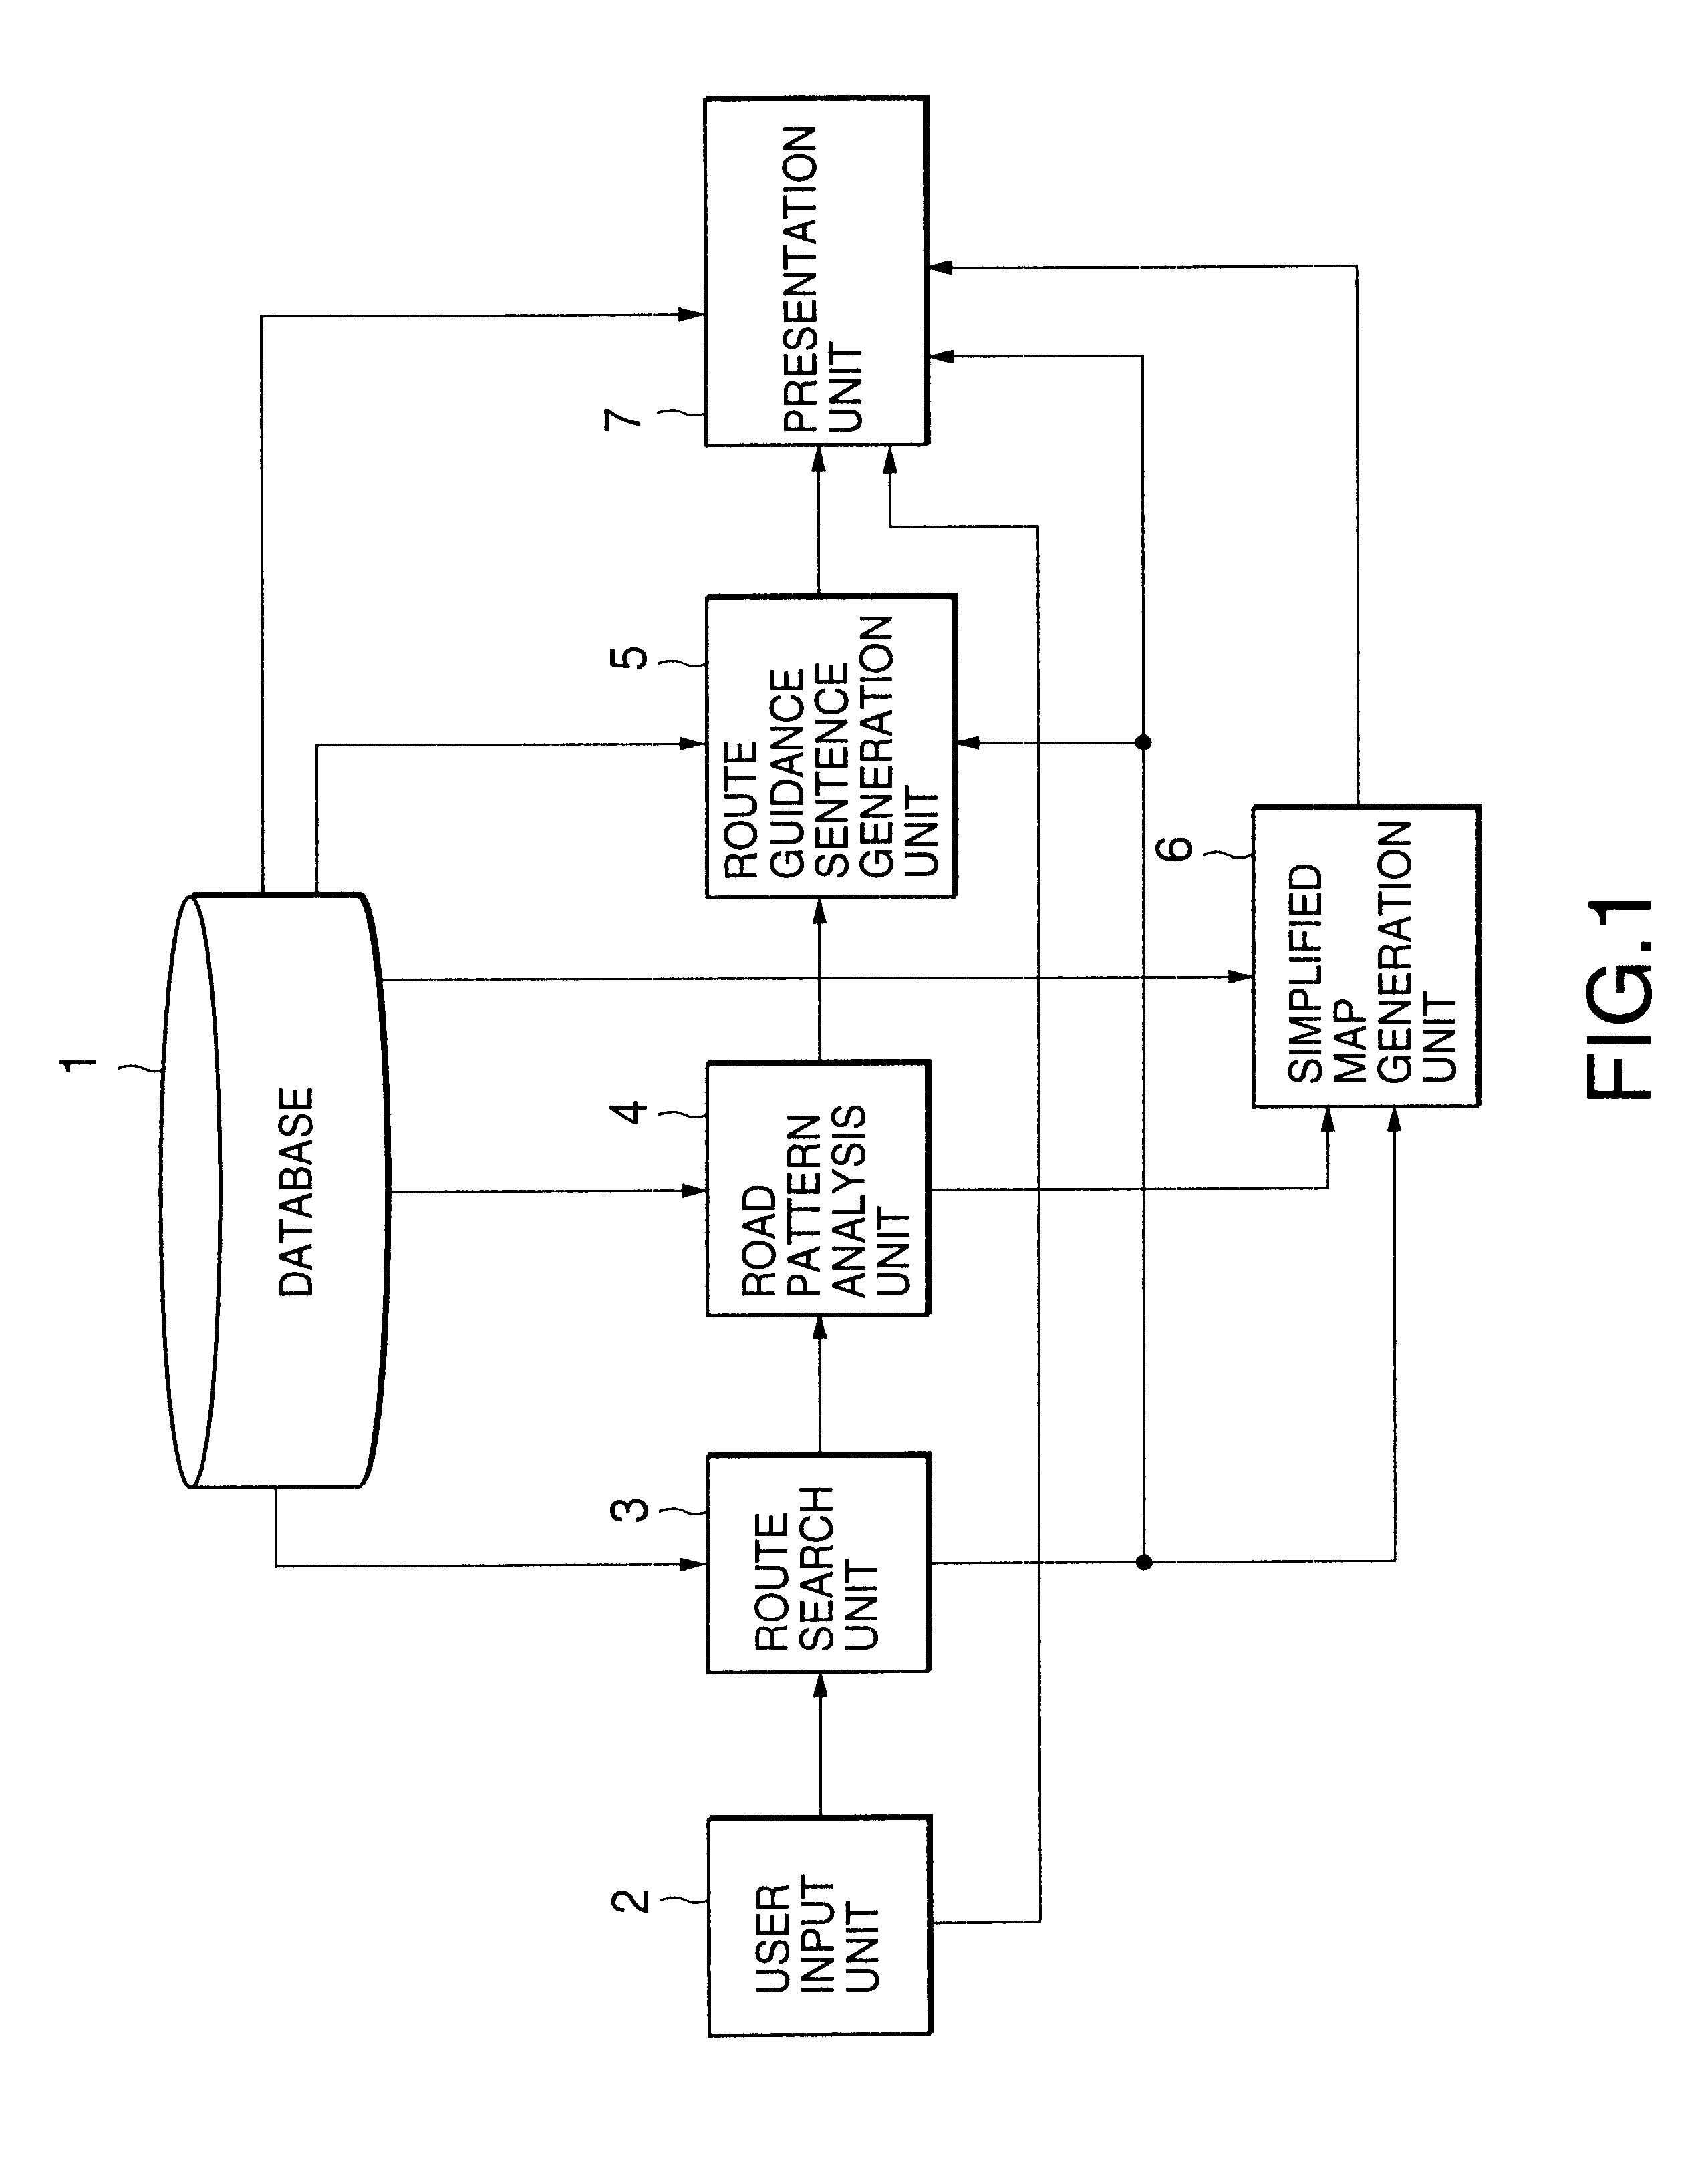 Route guidance apparatus and method